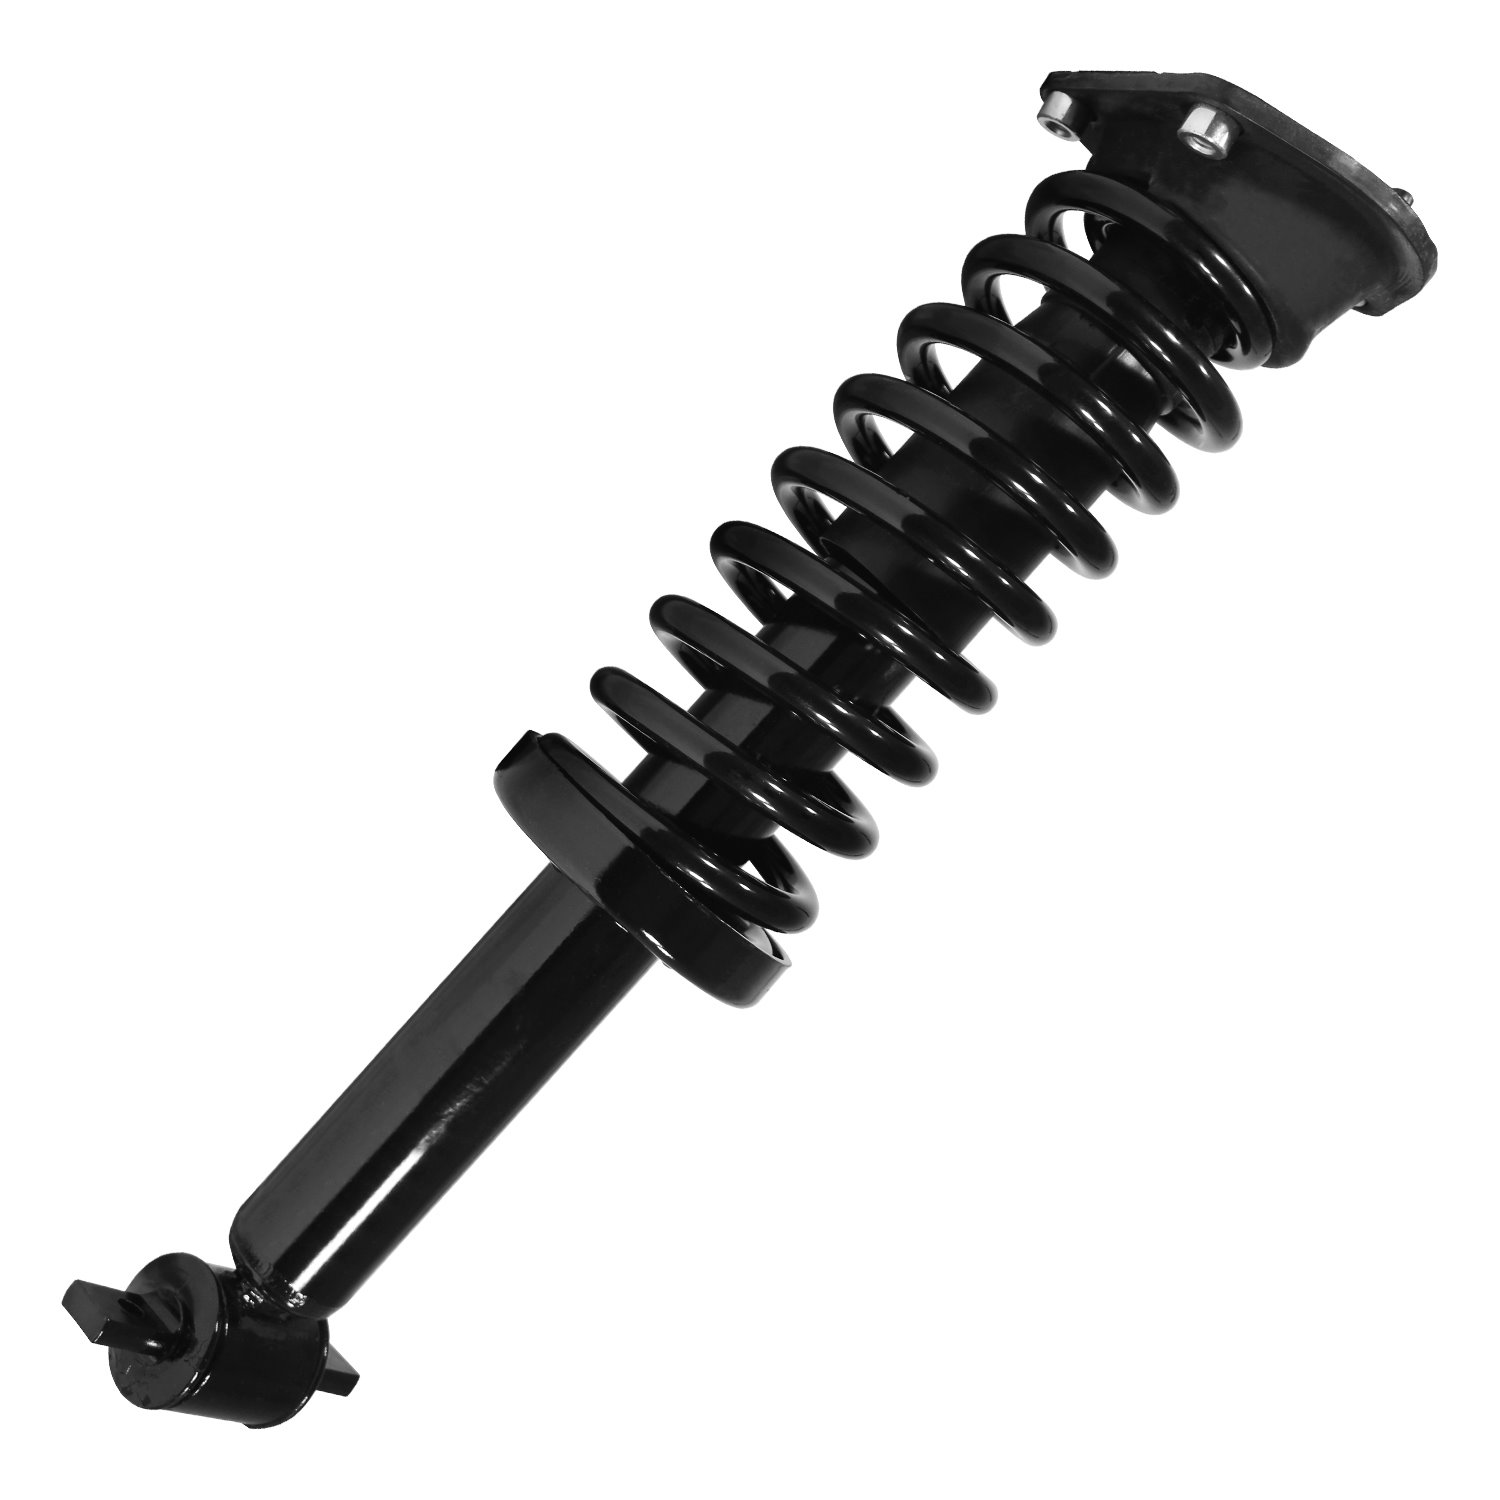 11994 Suspension Strut & Coil Spring Assembly Fits Select Chevy Camaro, Pontiac Firebird